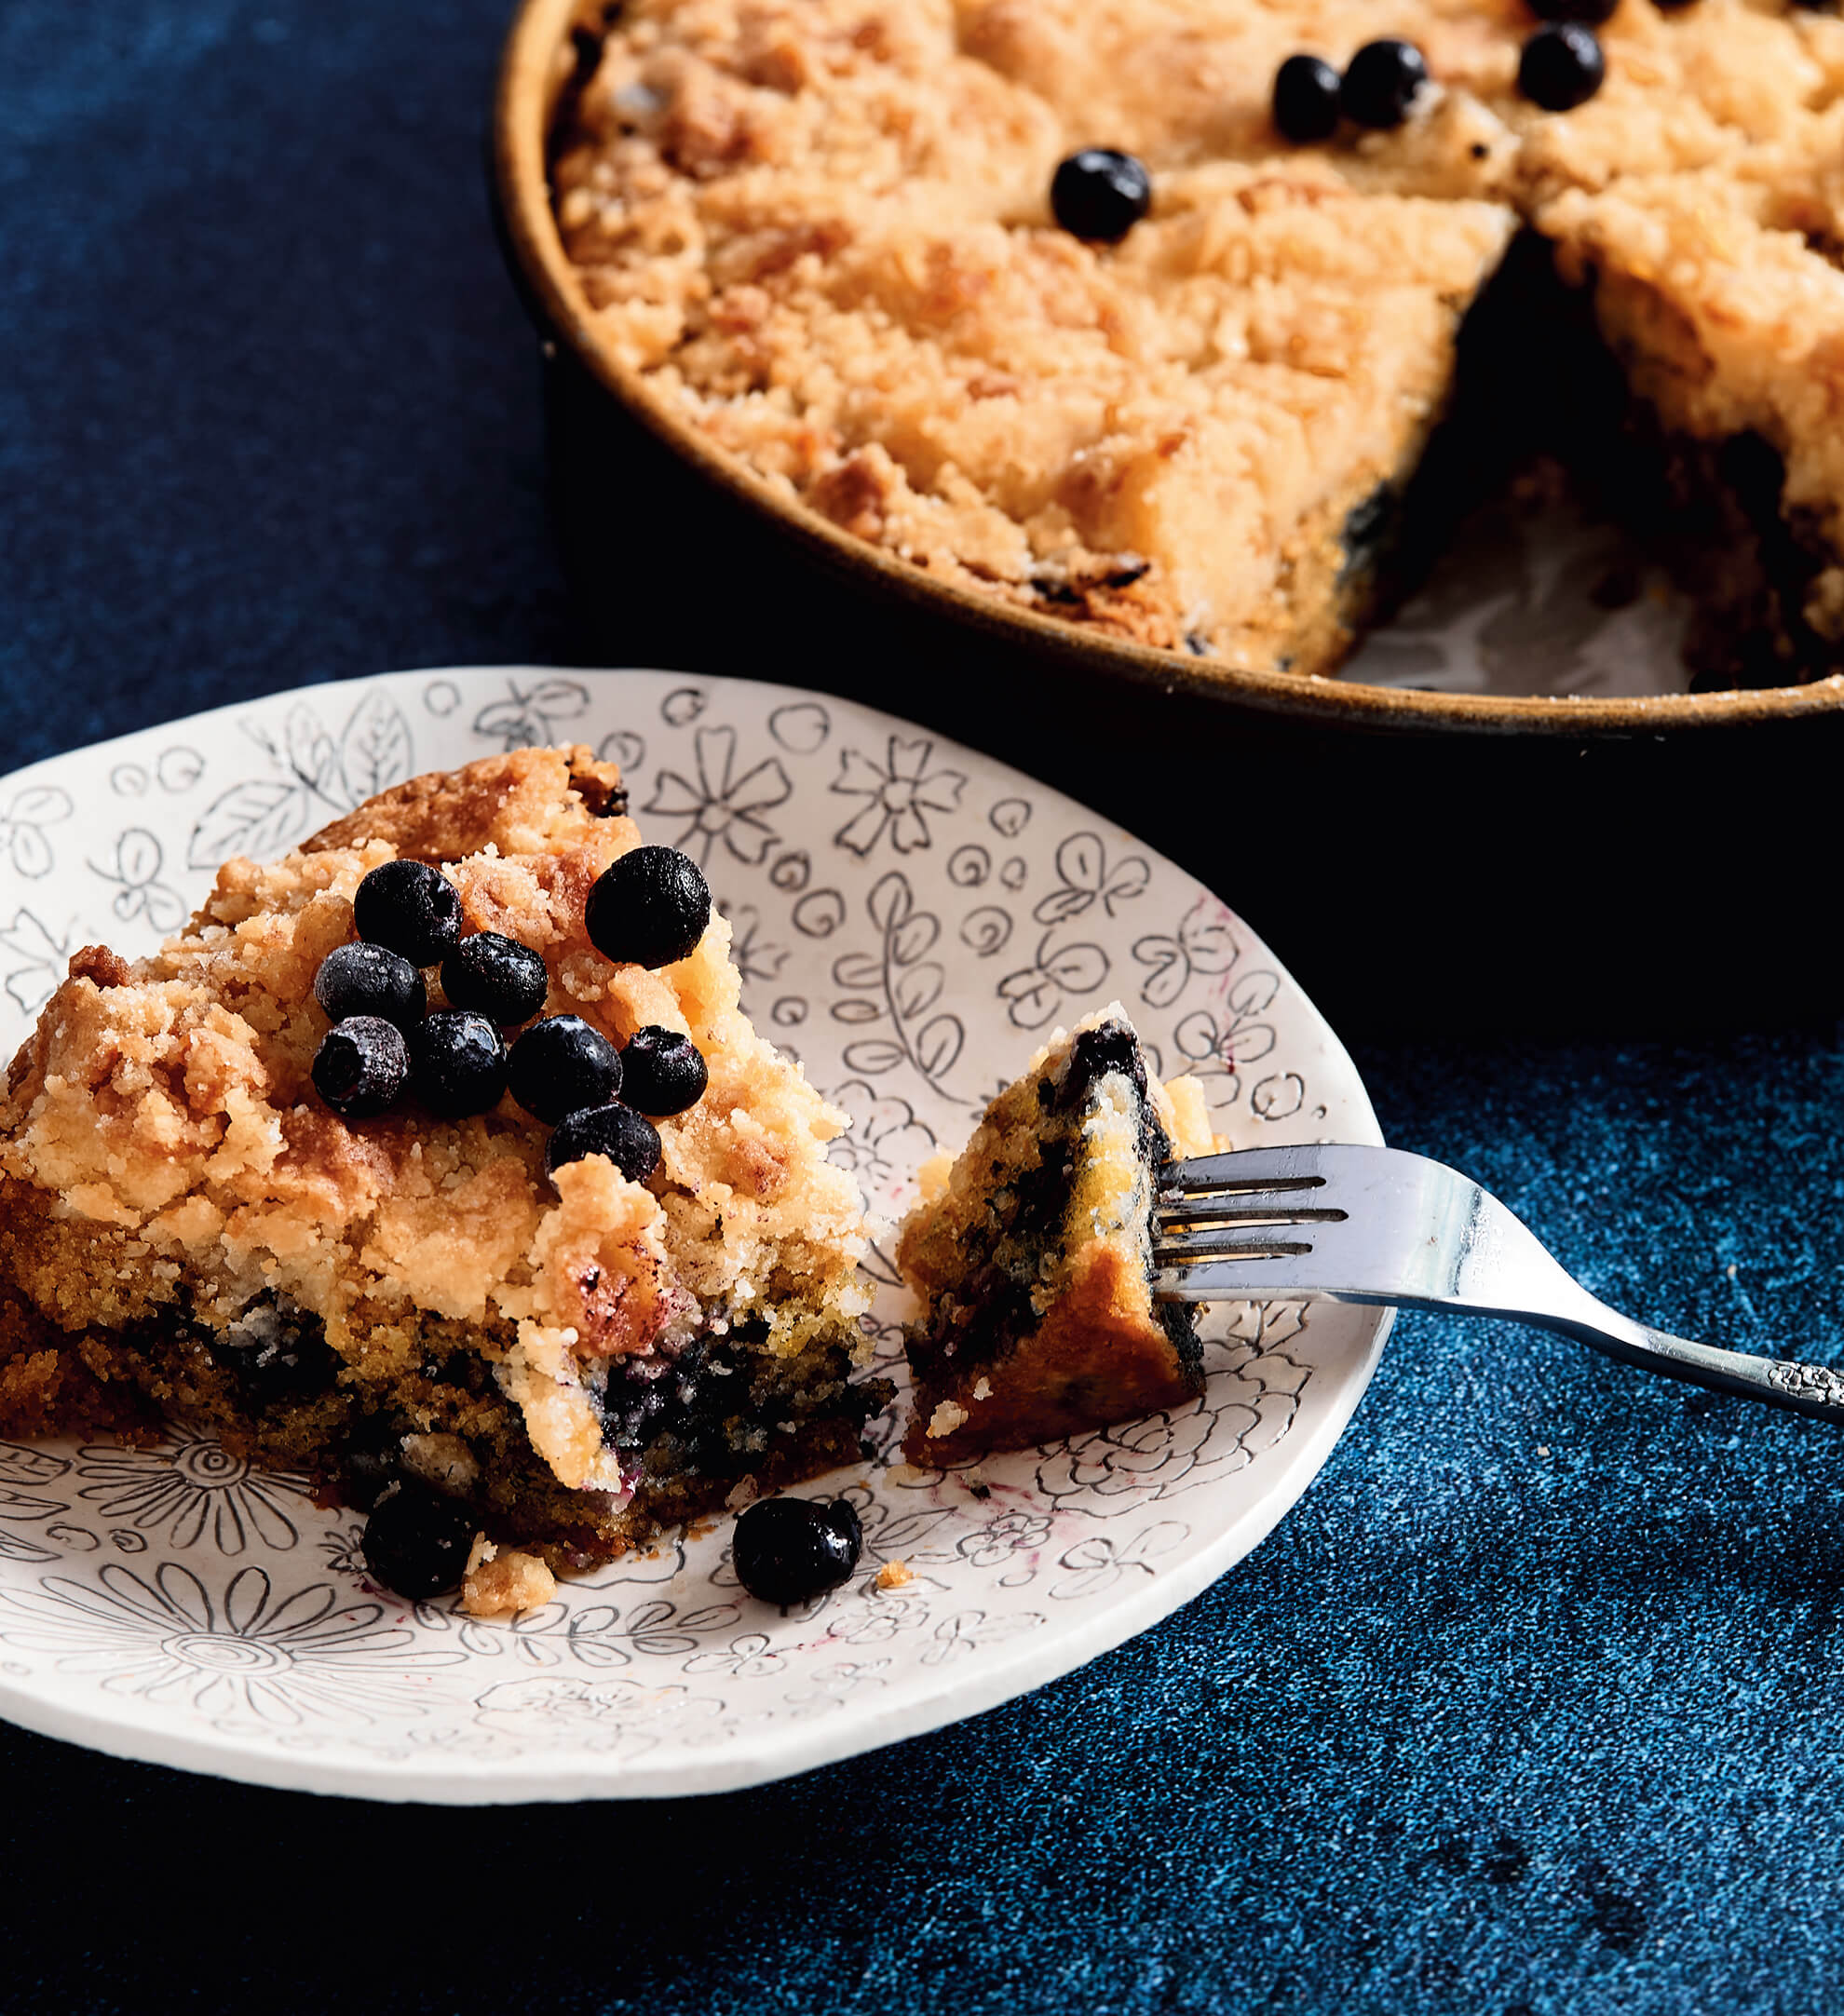 Eat Cake For Dinner: Ina's Blueberry Crumb Cake